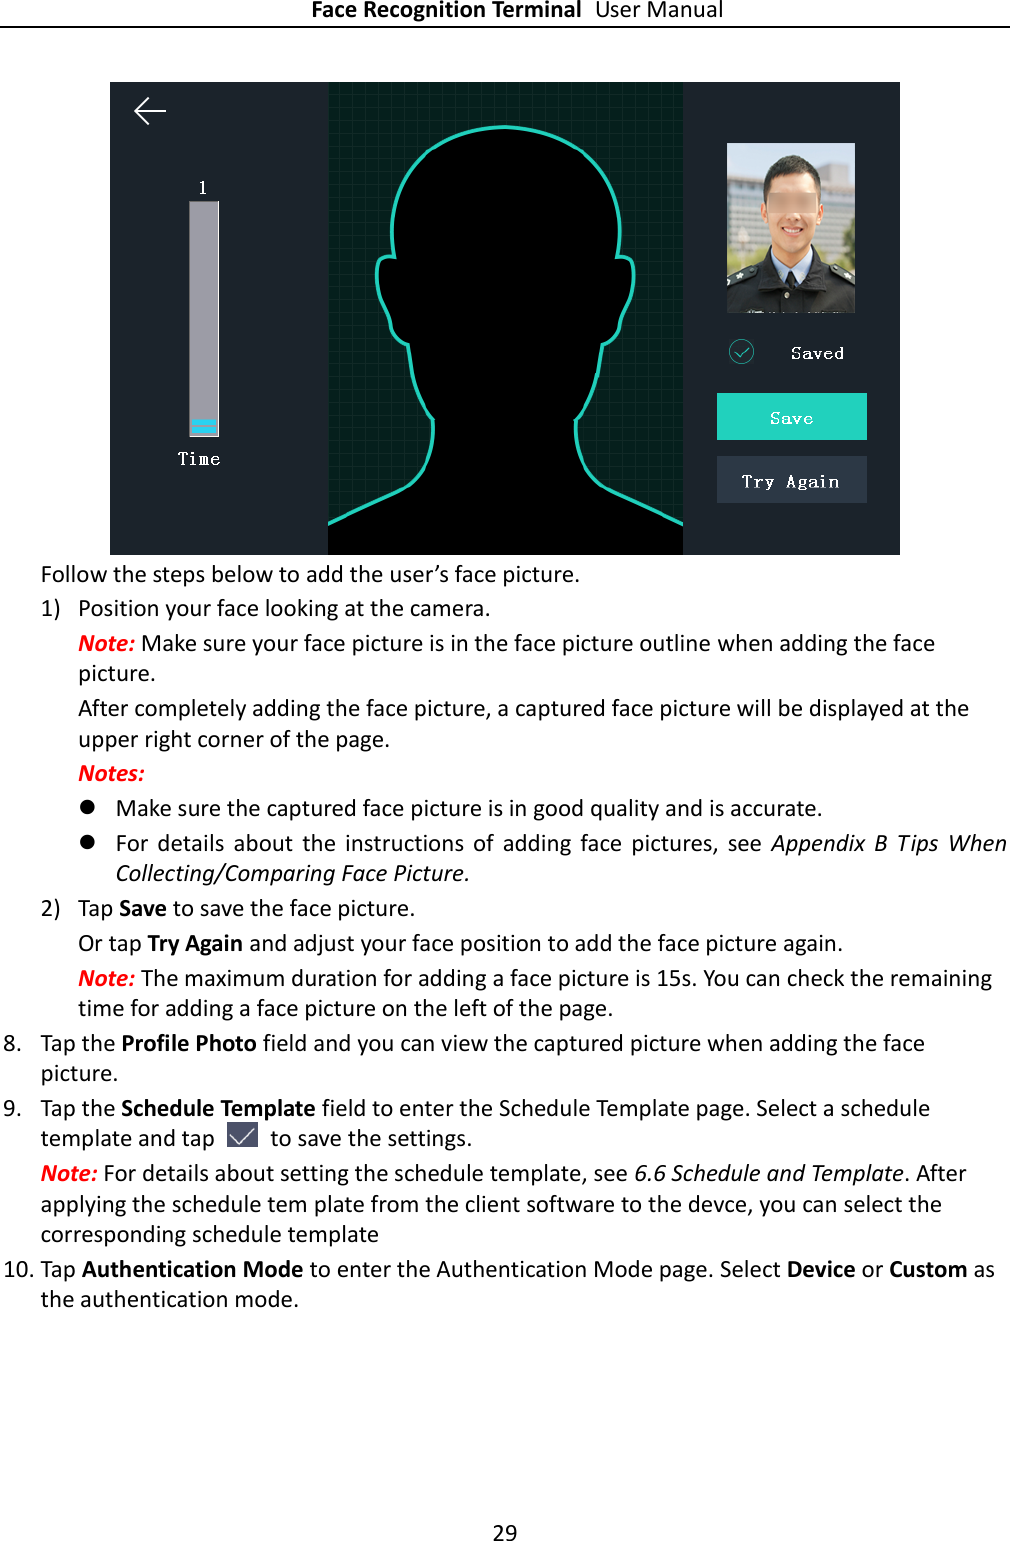 Face Recognition Terminal User Manual 29   Follow the steps below to add the user’s face picture. 1) Position your face looking at the camera. Note: Make sure your face picture is in the face picture outline when adding the face picture. After completely adding the face picture, a captured face picture will be displayed at the upper right corner of the page. Notes:  Make sure the captured face picture is in good quality and is accurate.  For  details  about  the  instructions  of  adding  face  pictures,  see  Appendix  B  Tips  When Collecting/Comparing Face Picture. 2) Tap Save to save the face picture. Or tap Try Again and adjust your face position to add the face picture again. Note: The maximum duration for adding a face picture is 15s. You can check the remaining time for adding a face picture on the left of the page. 8. Tap the Profile Photo field and you can view the captured picture when adding the face picture. 9. Tap the Schedule Template field to enter the Schedule Template page. Select a schedule template and tap    to save the settings. Note: For details about setting the schedule template, see 6.6 Schedule and Template. After applying the schedule tem plate from the client software to the devce, you can select the corresponding schedule template 10. Tap Authentication Mode to enter the Authentication Mode page. Select Device or Custom as the authentication mode. 